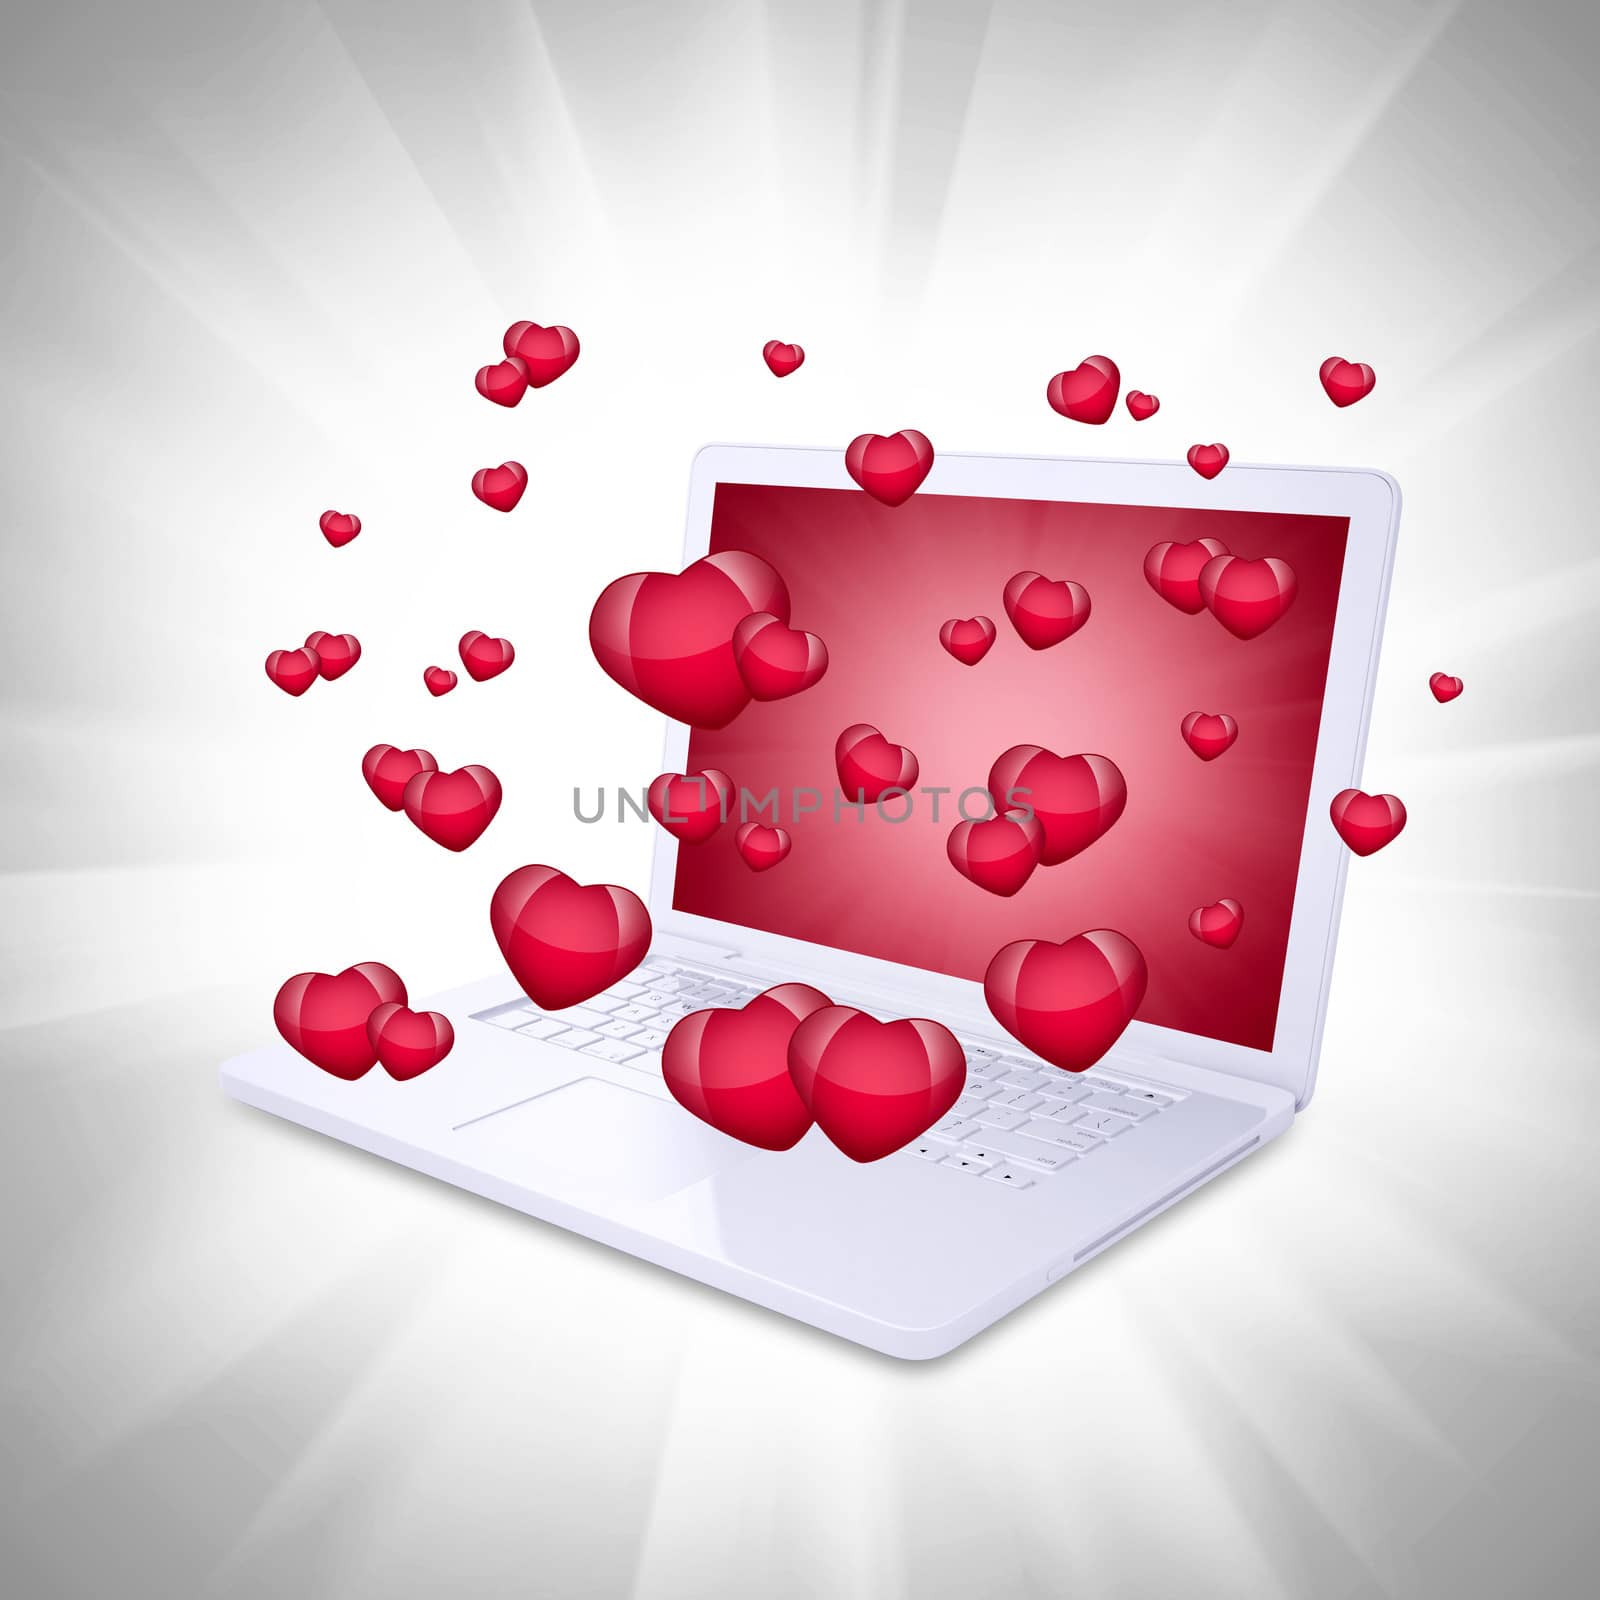 Red hearts fly out of the laptop. Computer technology concept on Valentine's Day